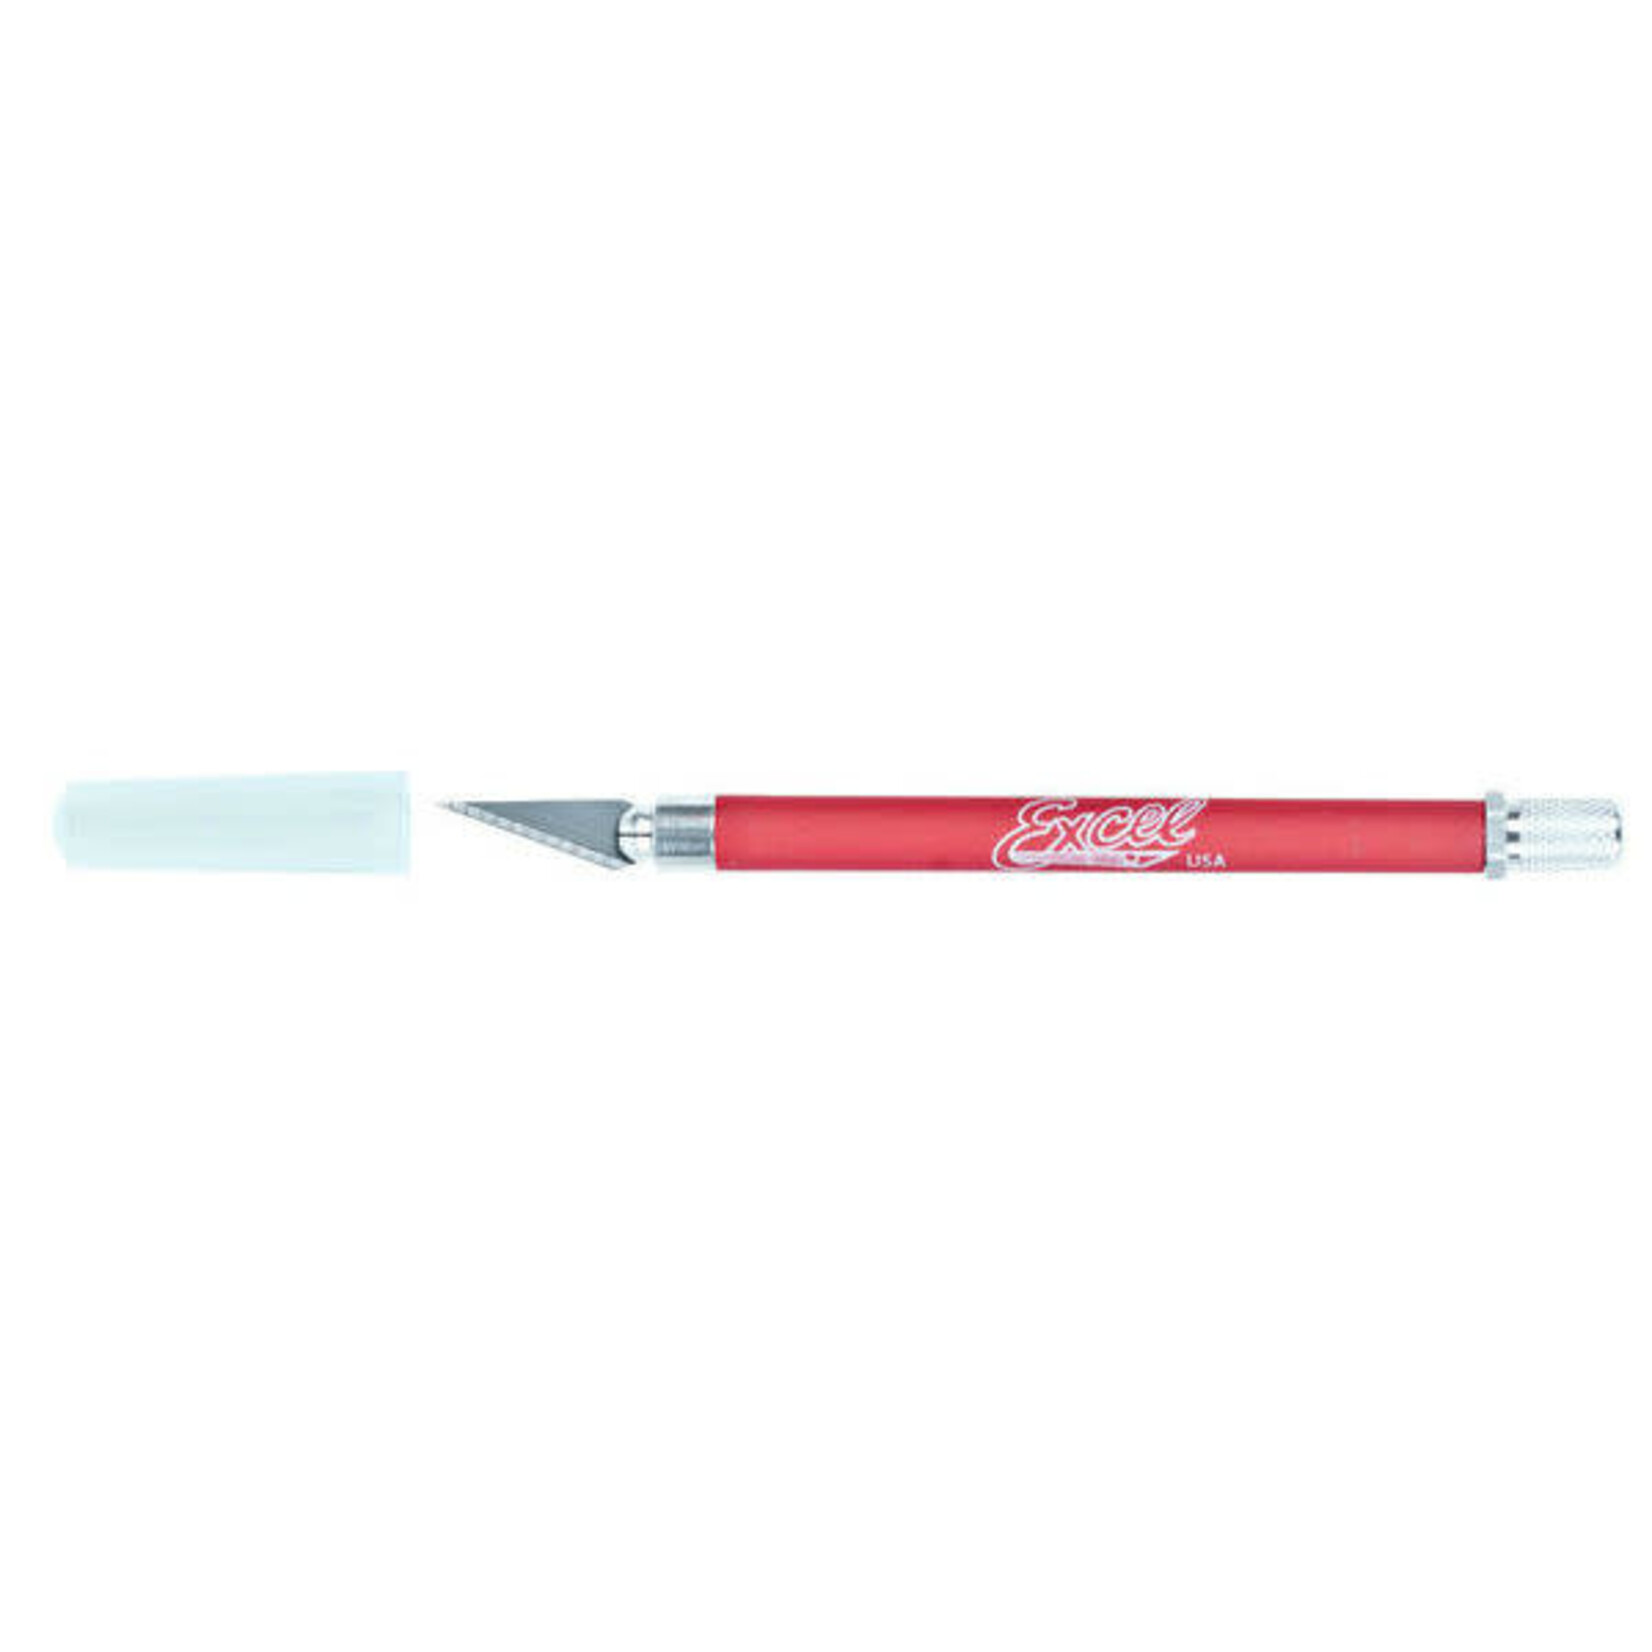 Excel K18 Grip-On Knife Red with Safety Cap